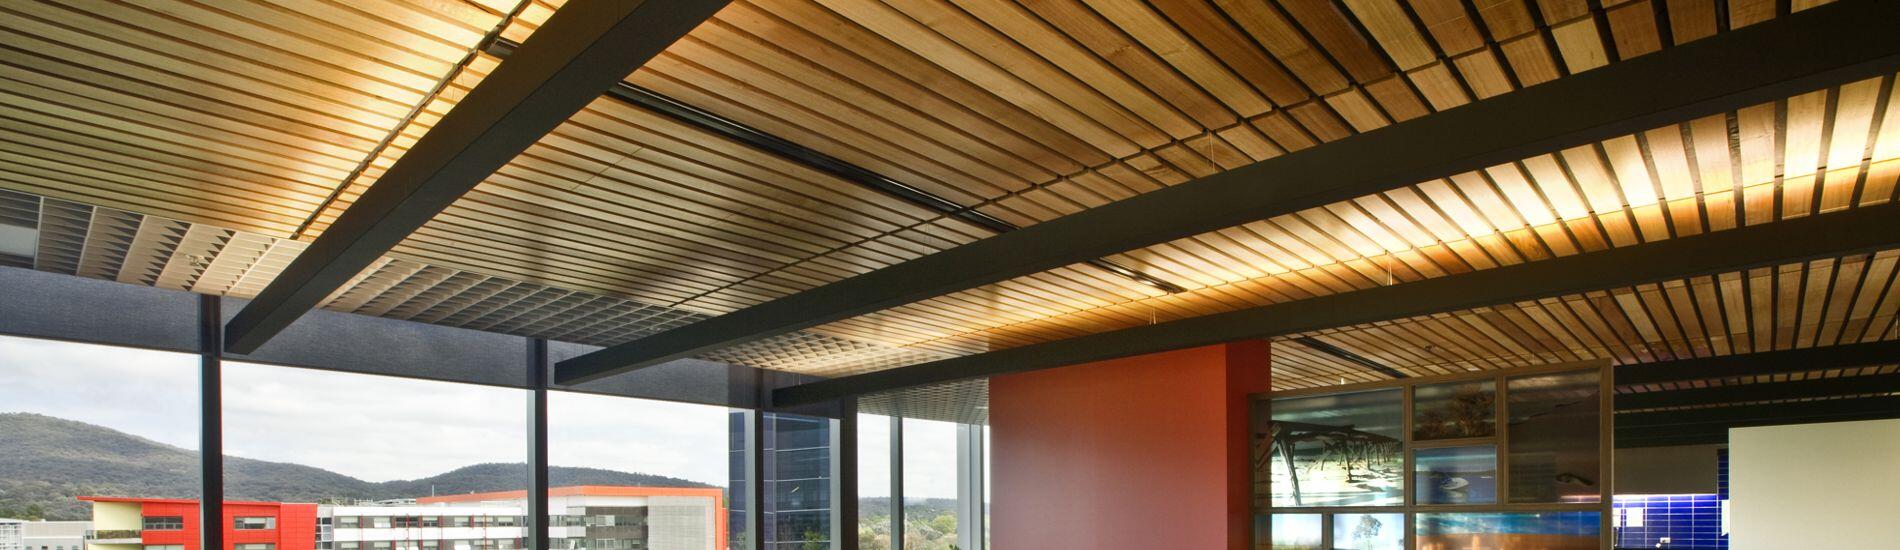 SUPASLAT Slatted Ceiling Panels with Acoustic Insulation for office fit-out